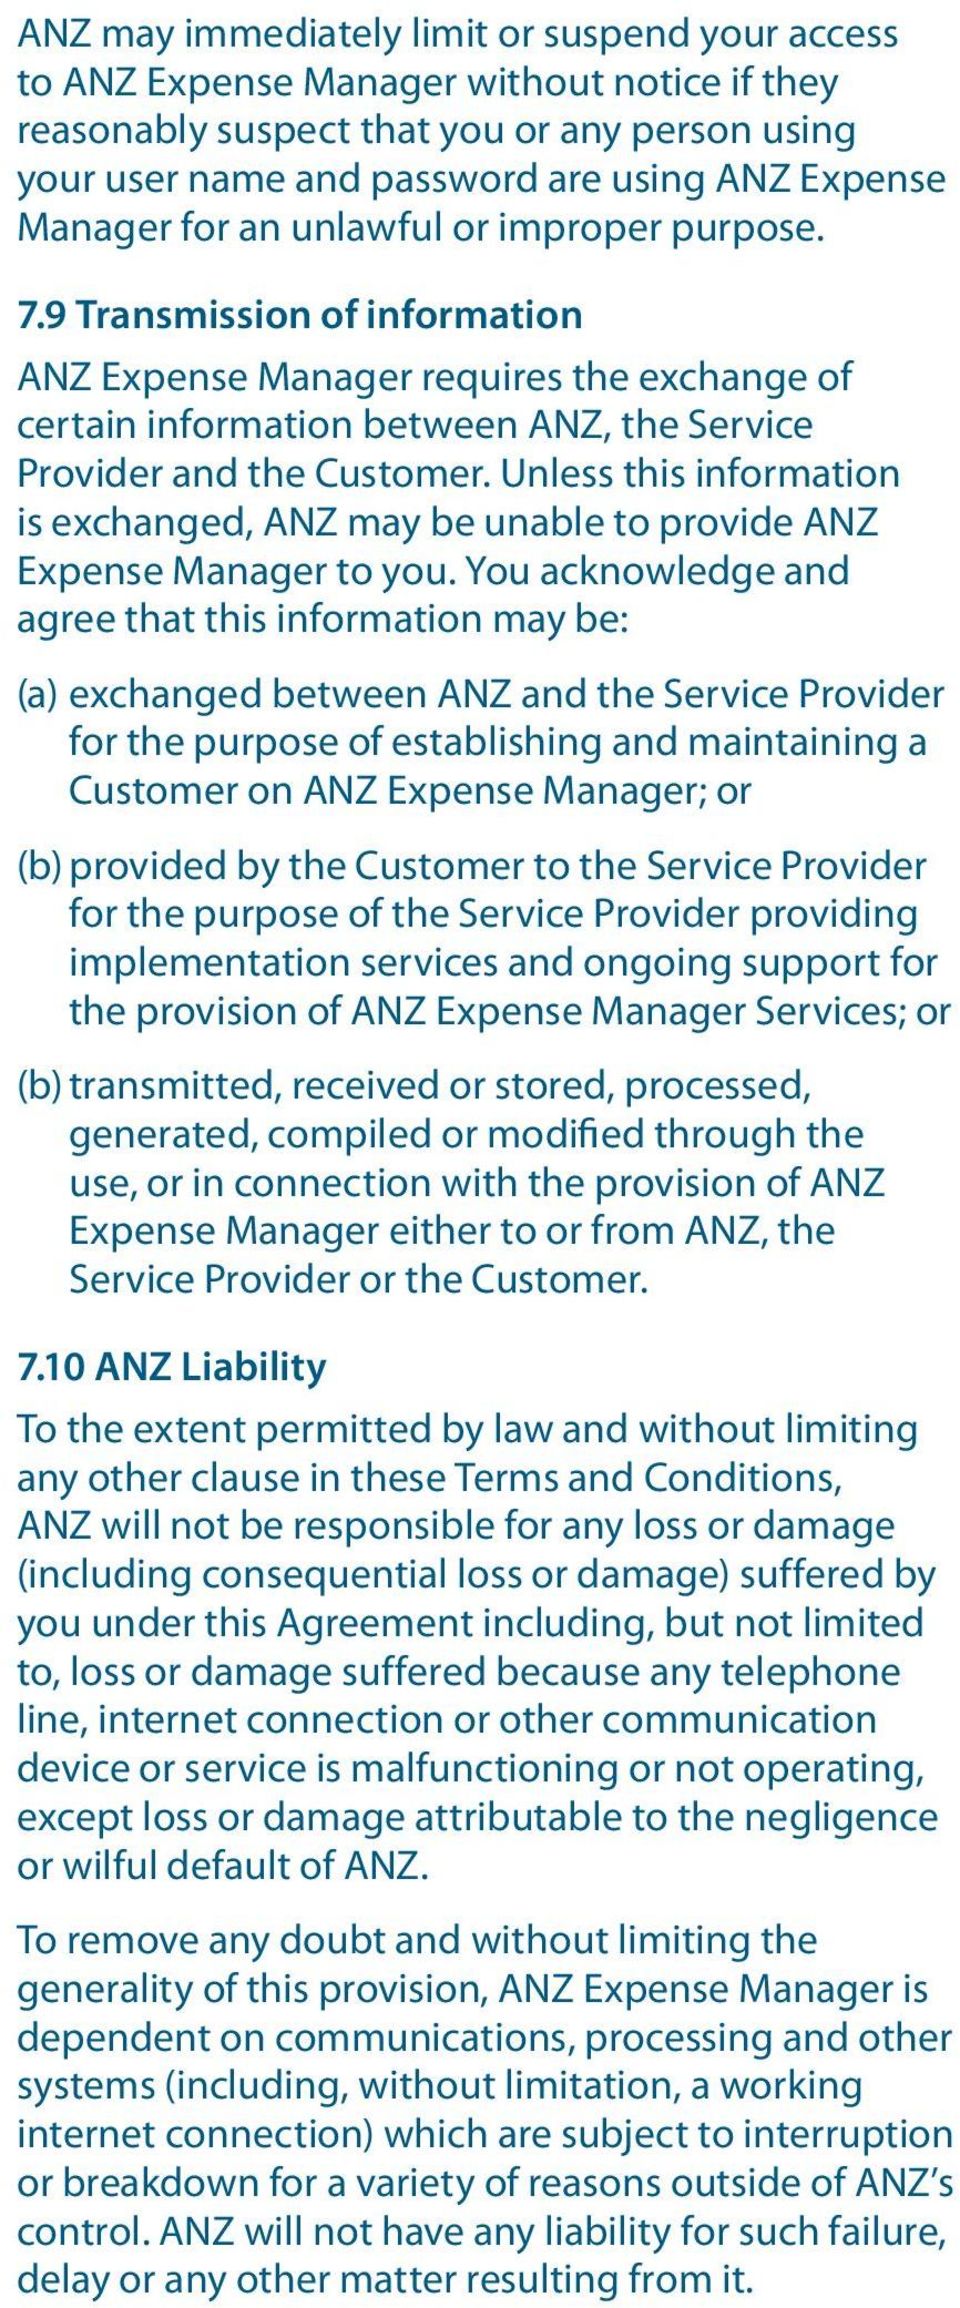 Unless this information is exchanged, ANZ may be unable to provide ANZ Expense Manager to you.